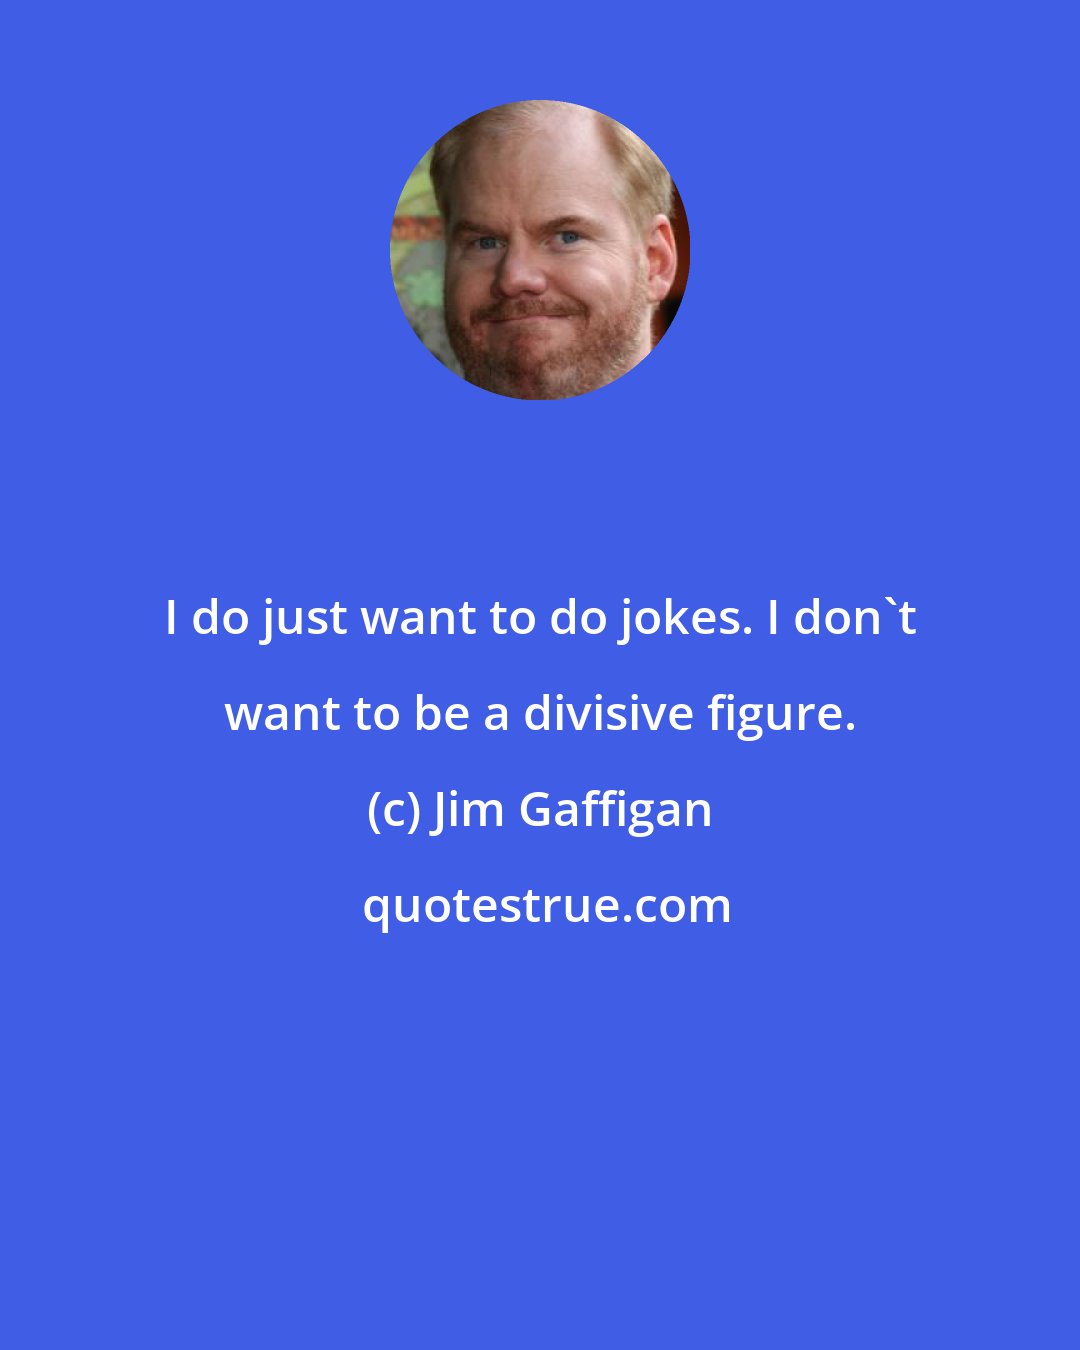 Jim Gaffigan: I do just want to do jokes. I don't want to be a divisive figure.